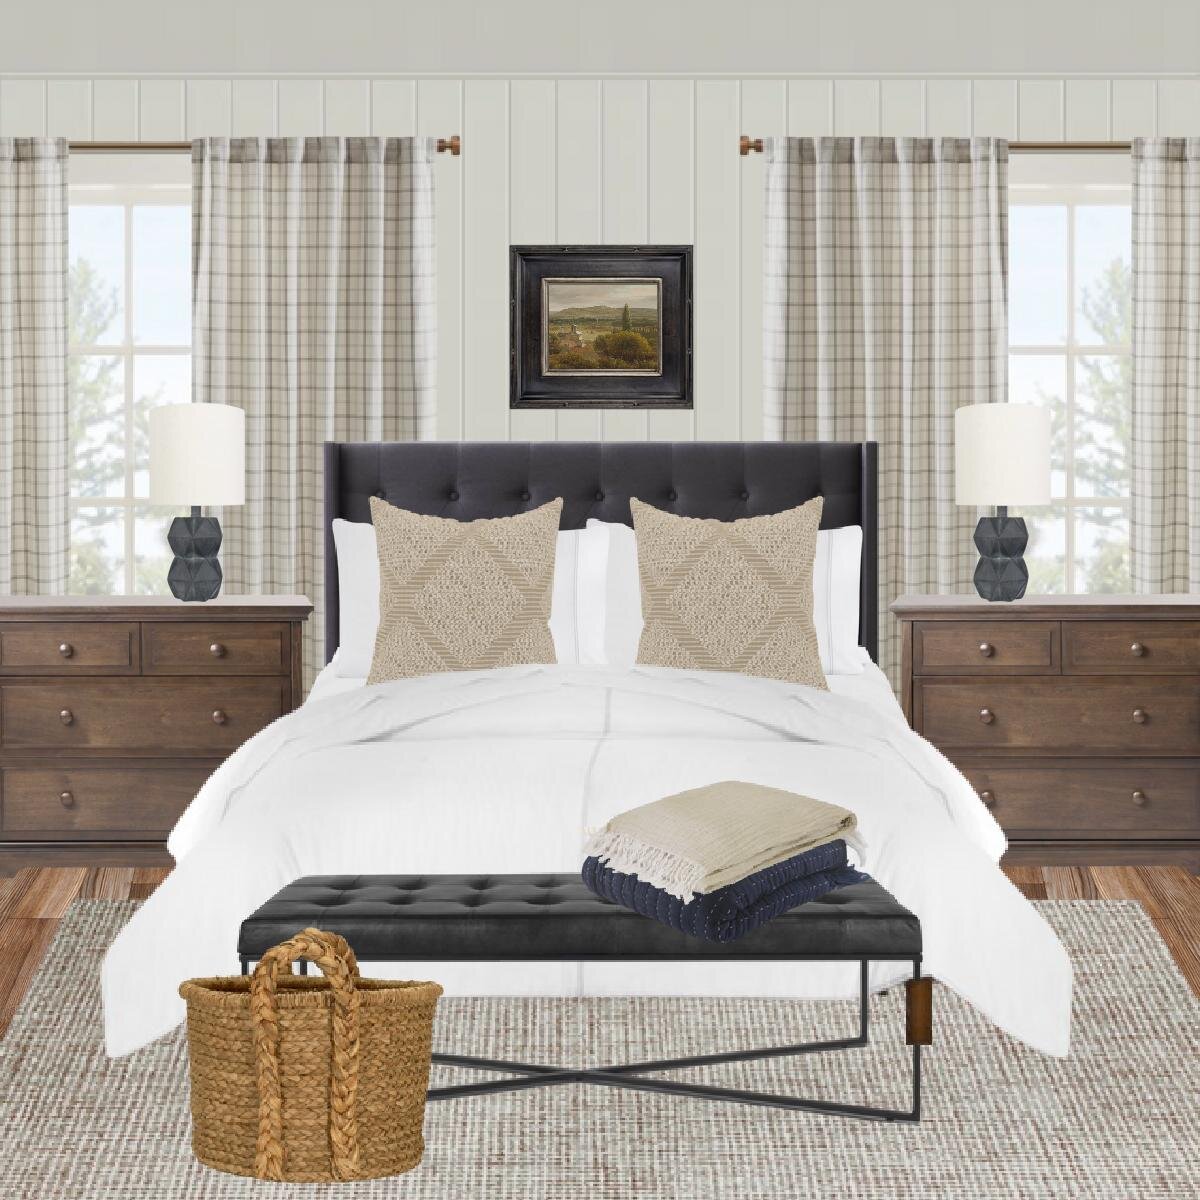 Fall Bedroom Refresh with Walmart Home. | Nadine Stay - Budget friendly furniture, decor, and textiles from Walmart that I love. Cottage, cabin bedroom makeover with plaid curtains, tufted headboard, and a warm color palette | Nadine Stay